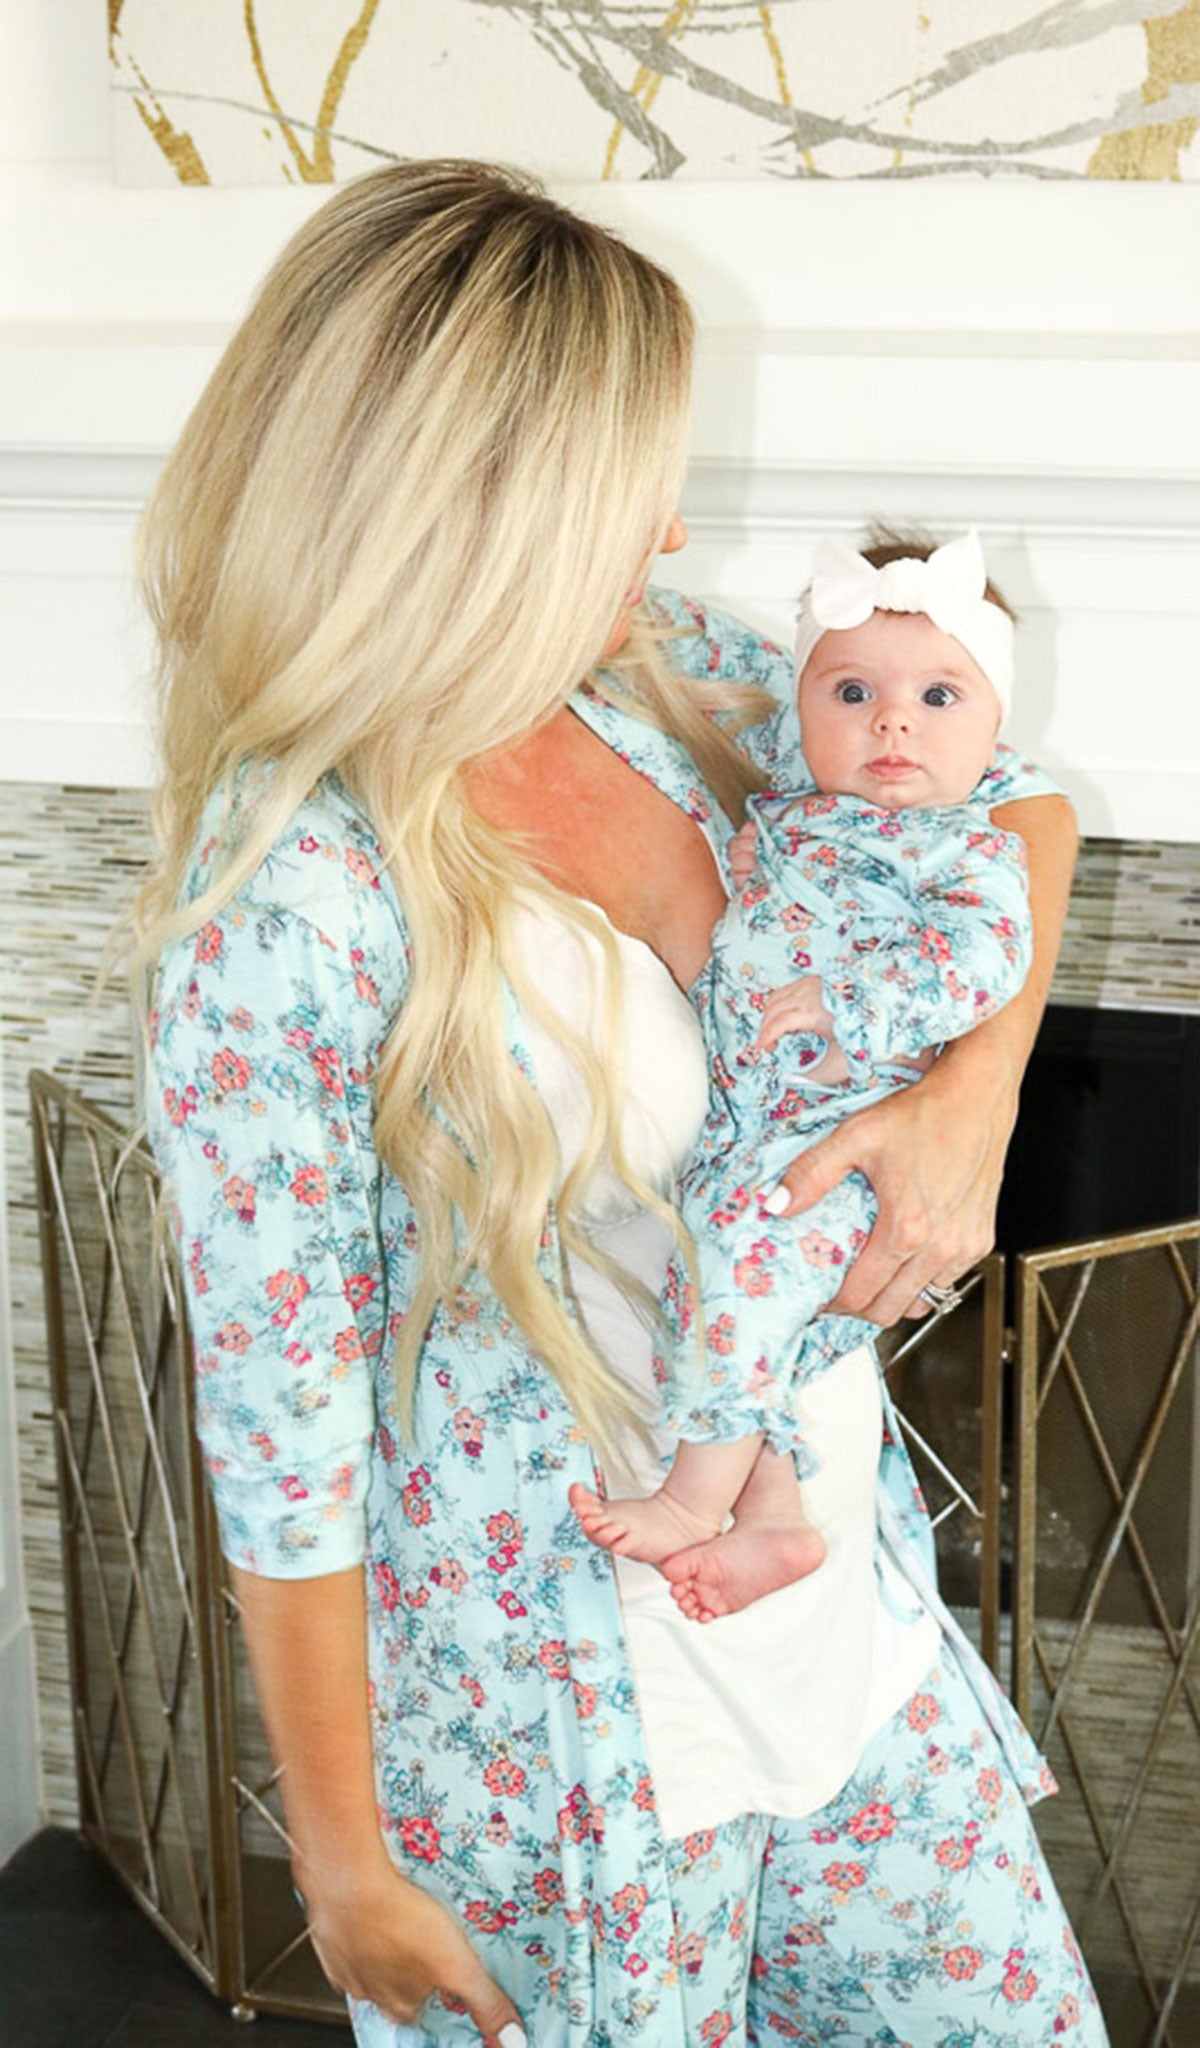 Azure Mist Baby's Ruffle Take-Me-Home set. Woman wearing Susan PJ in azure mist is holding baby girl wearing matching Ruffle Take-Me-Home top and pant with white hair bow.